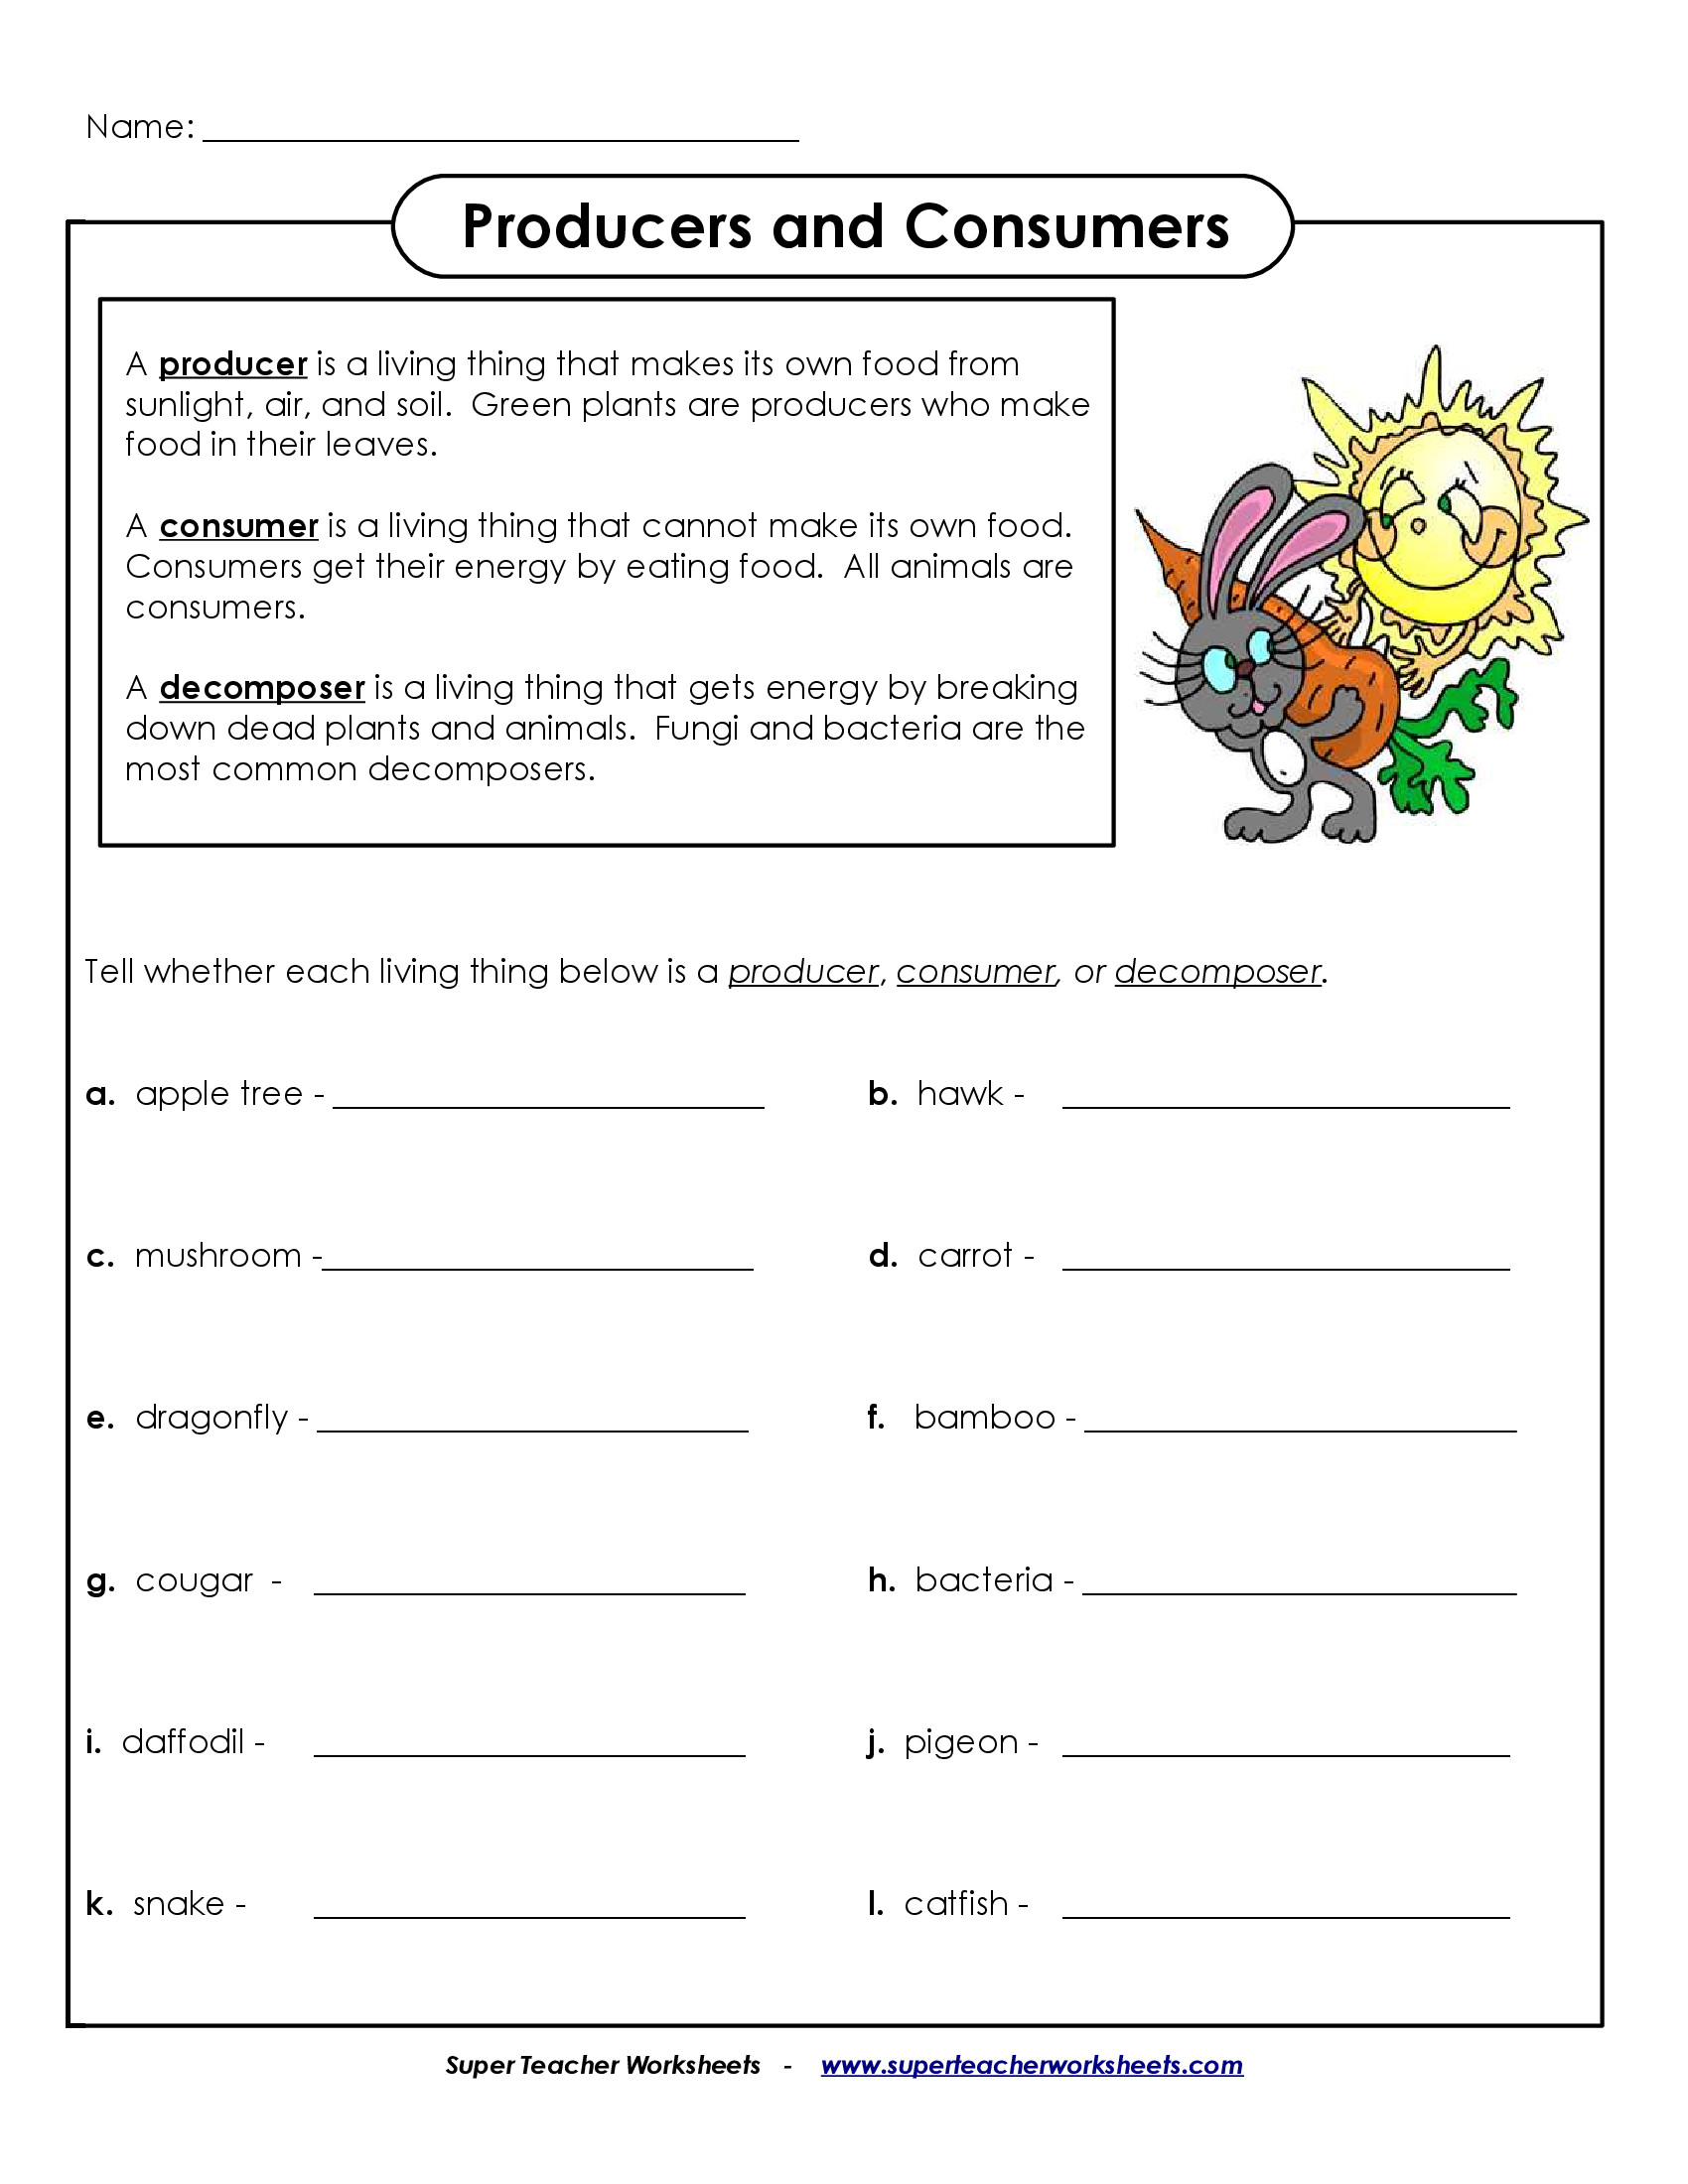 Producers and Consumers Worksheet Elegant Producers and Consumers Worksheet